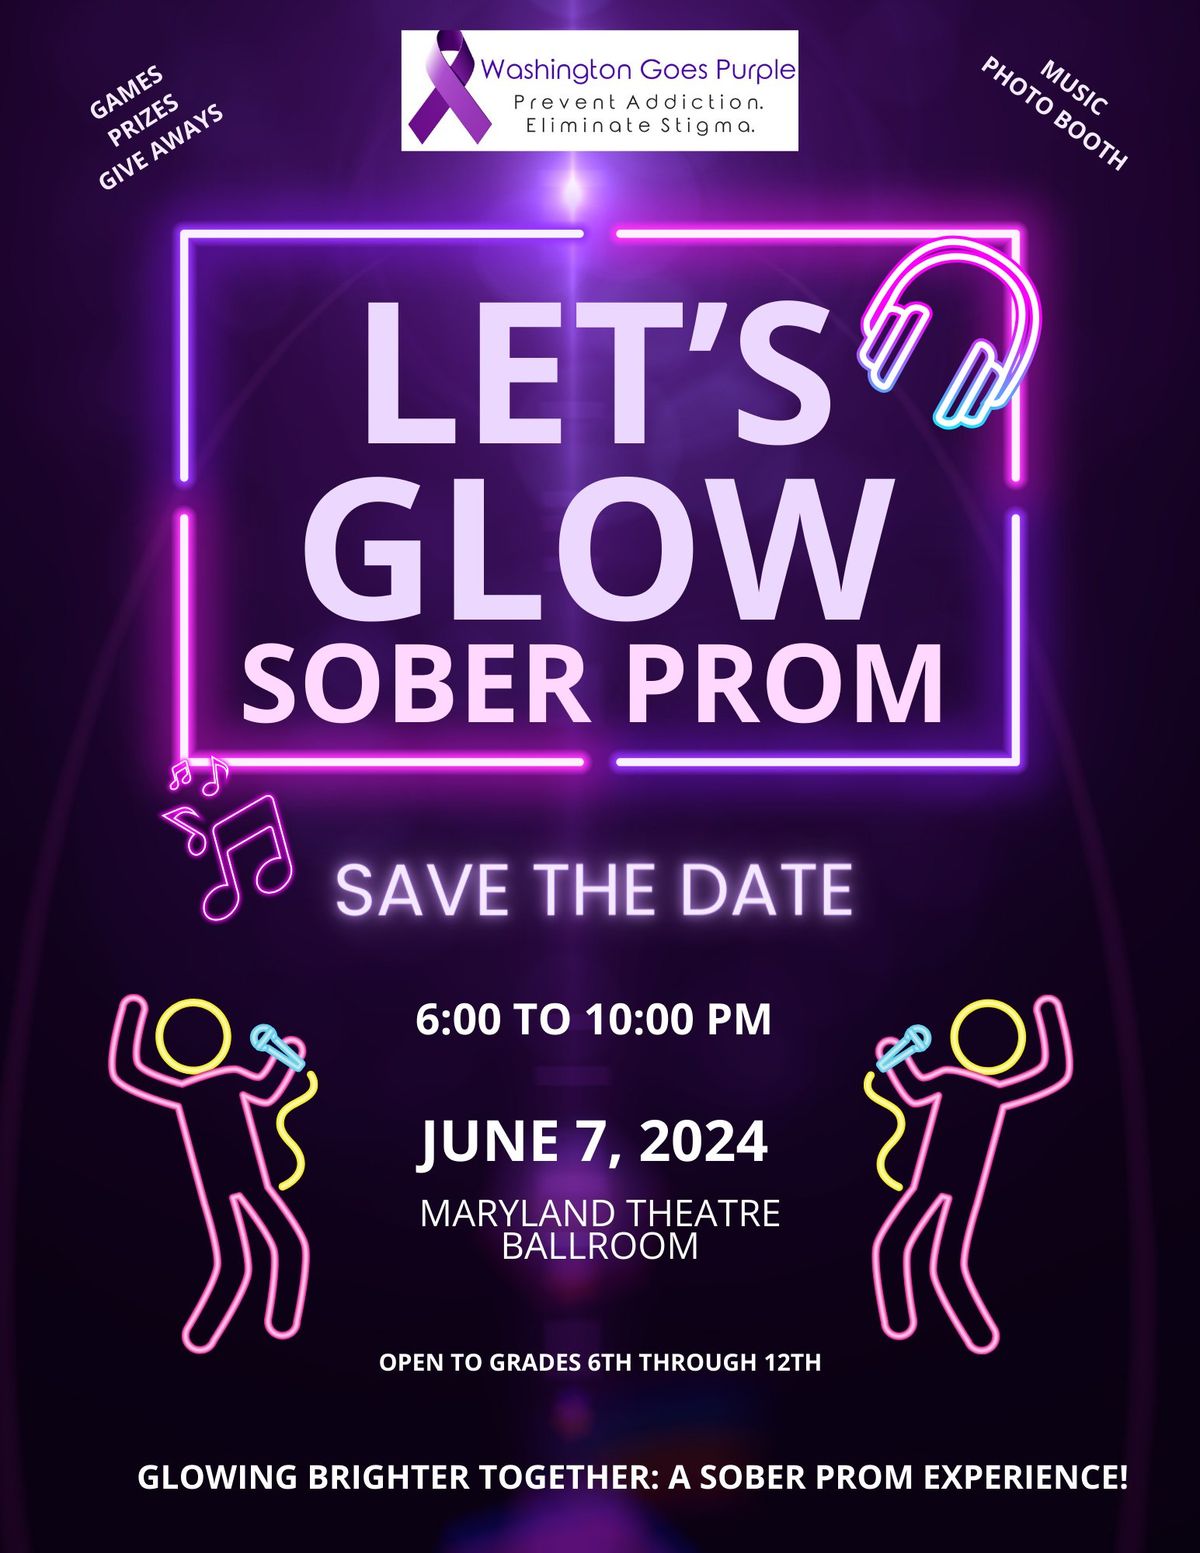 Let's Glow Sober Prom